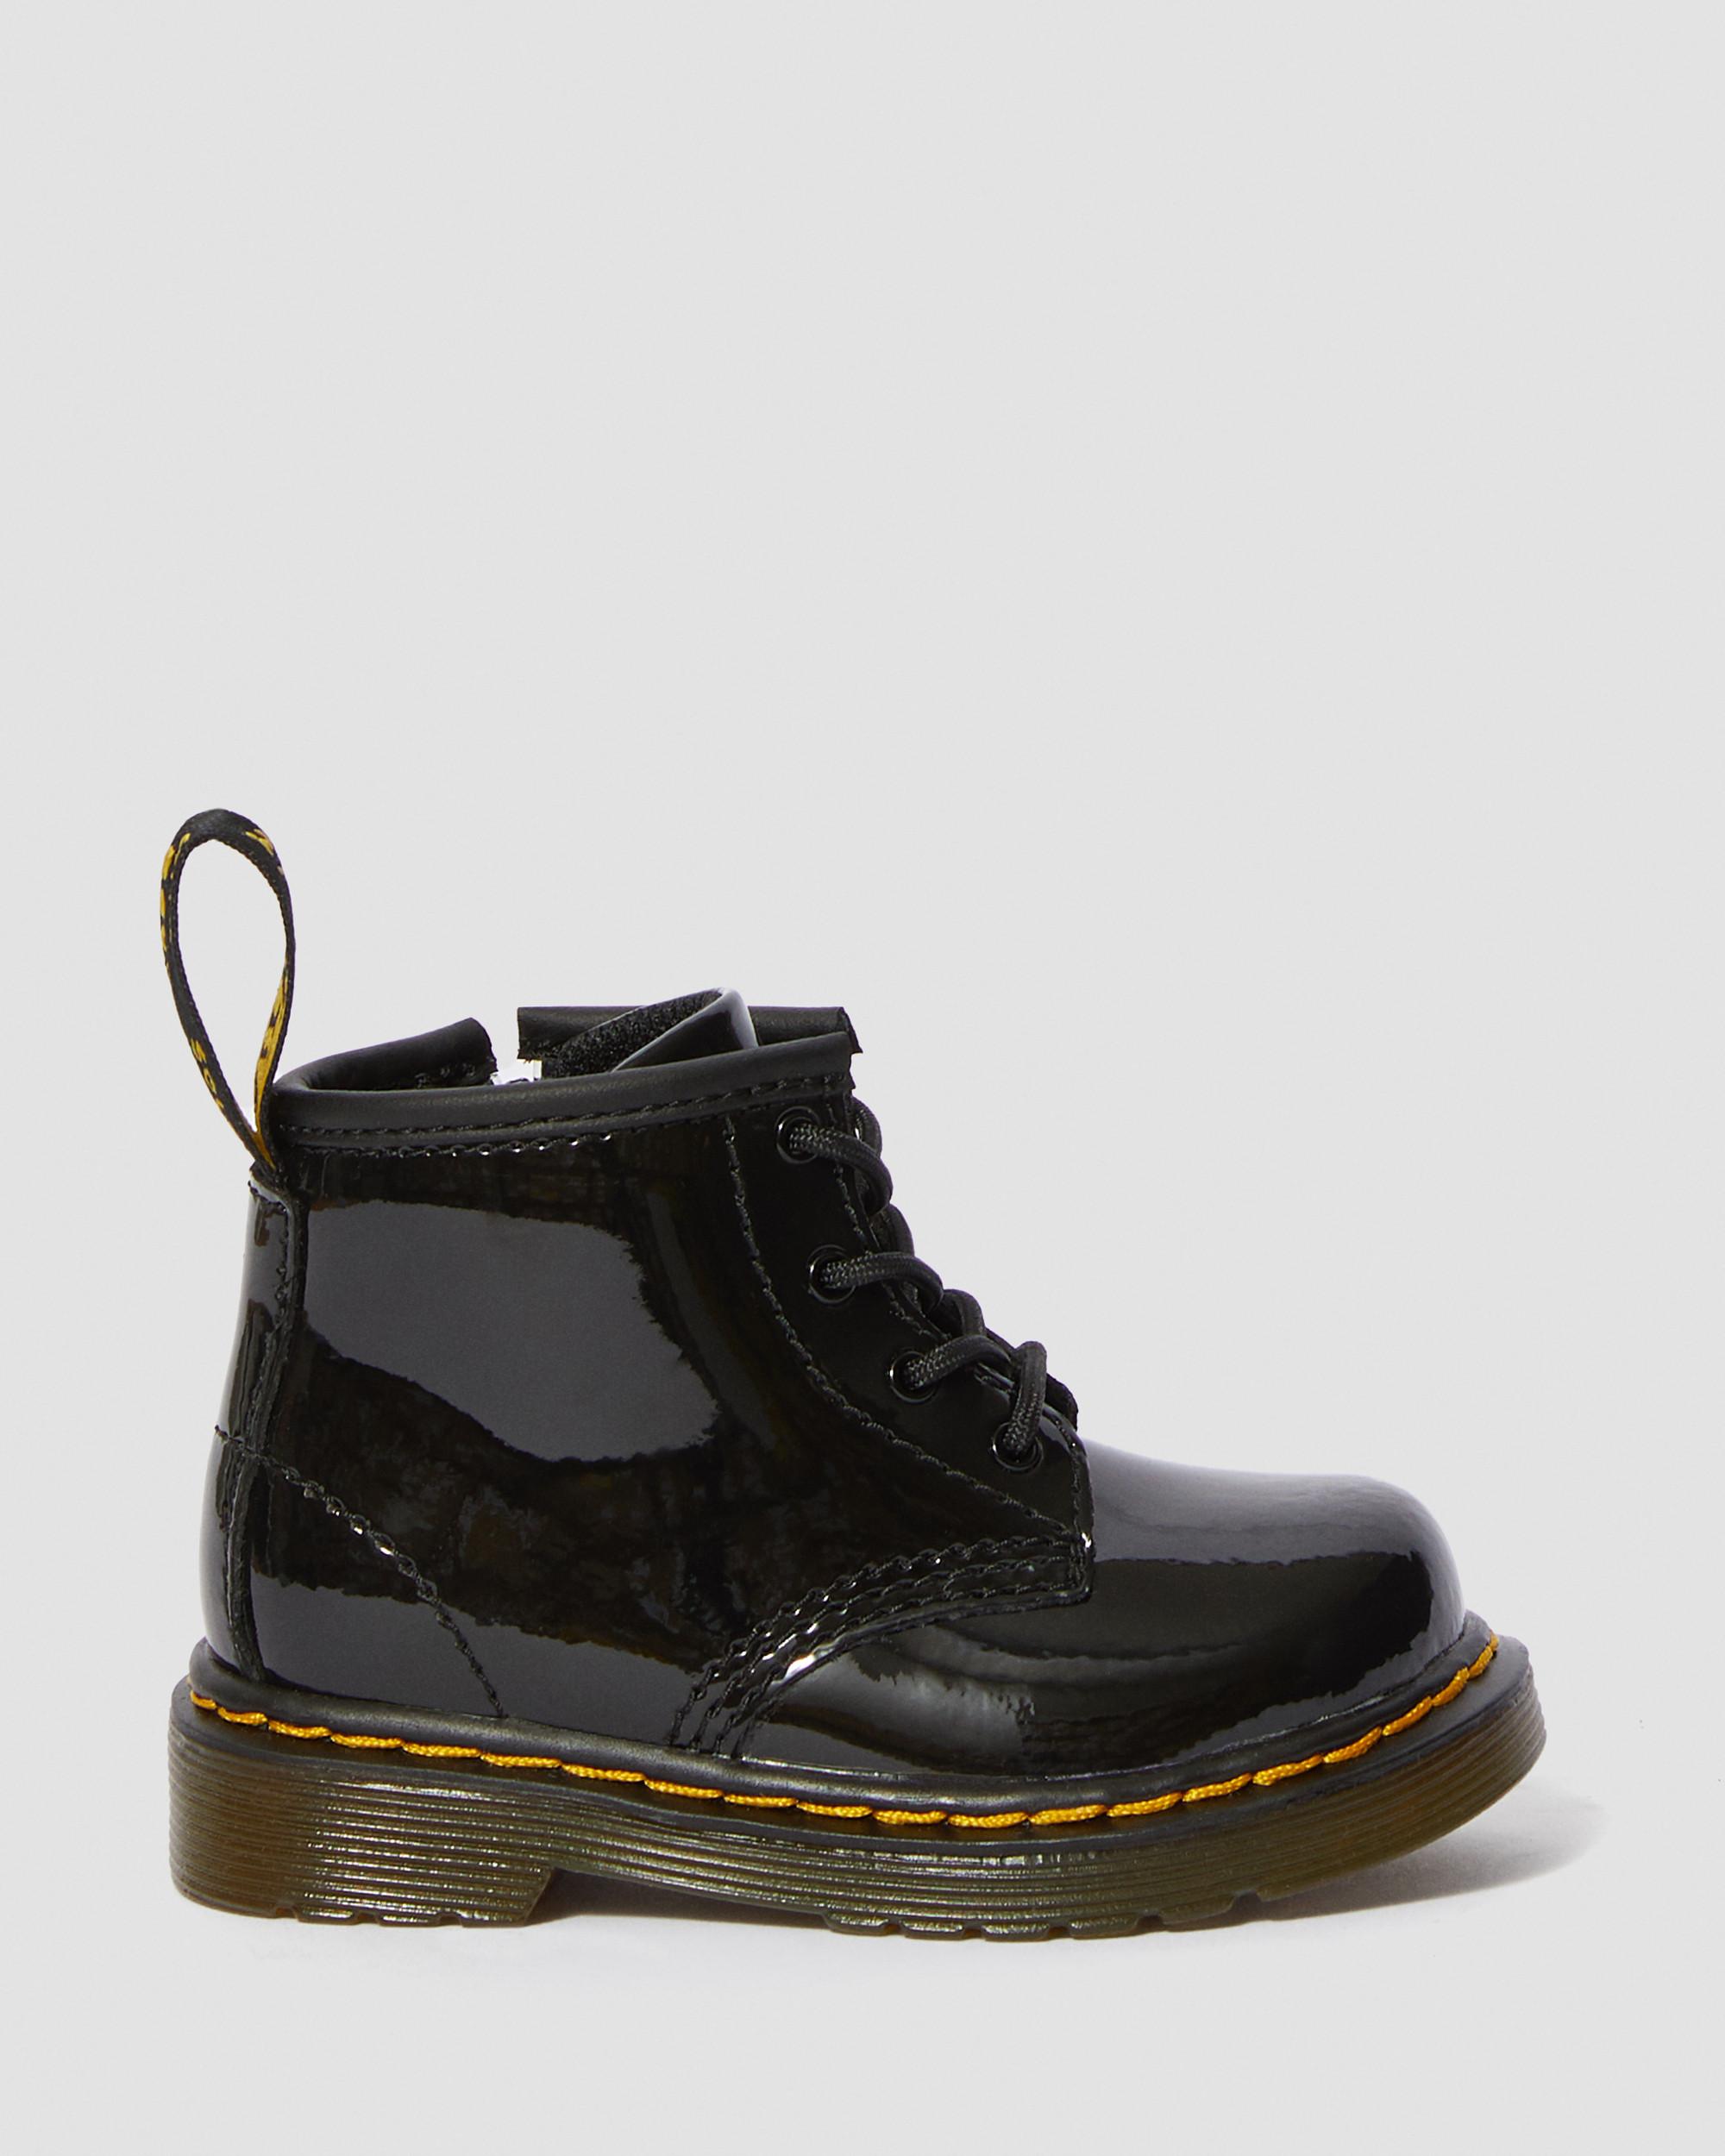 Infant 1460 Patent Leather Lace Up Boots in Black | Dr. Martens